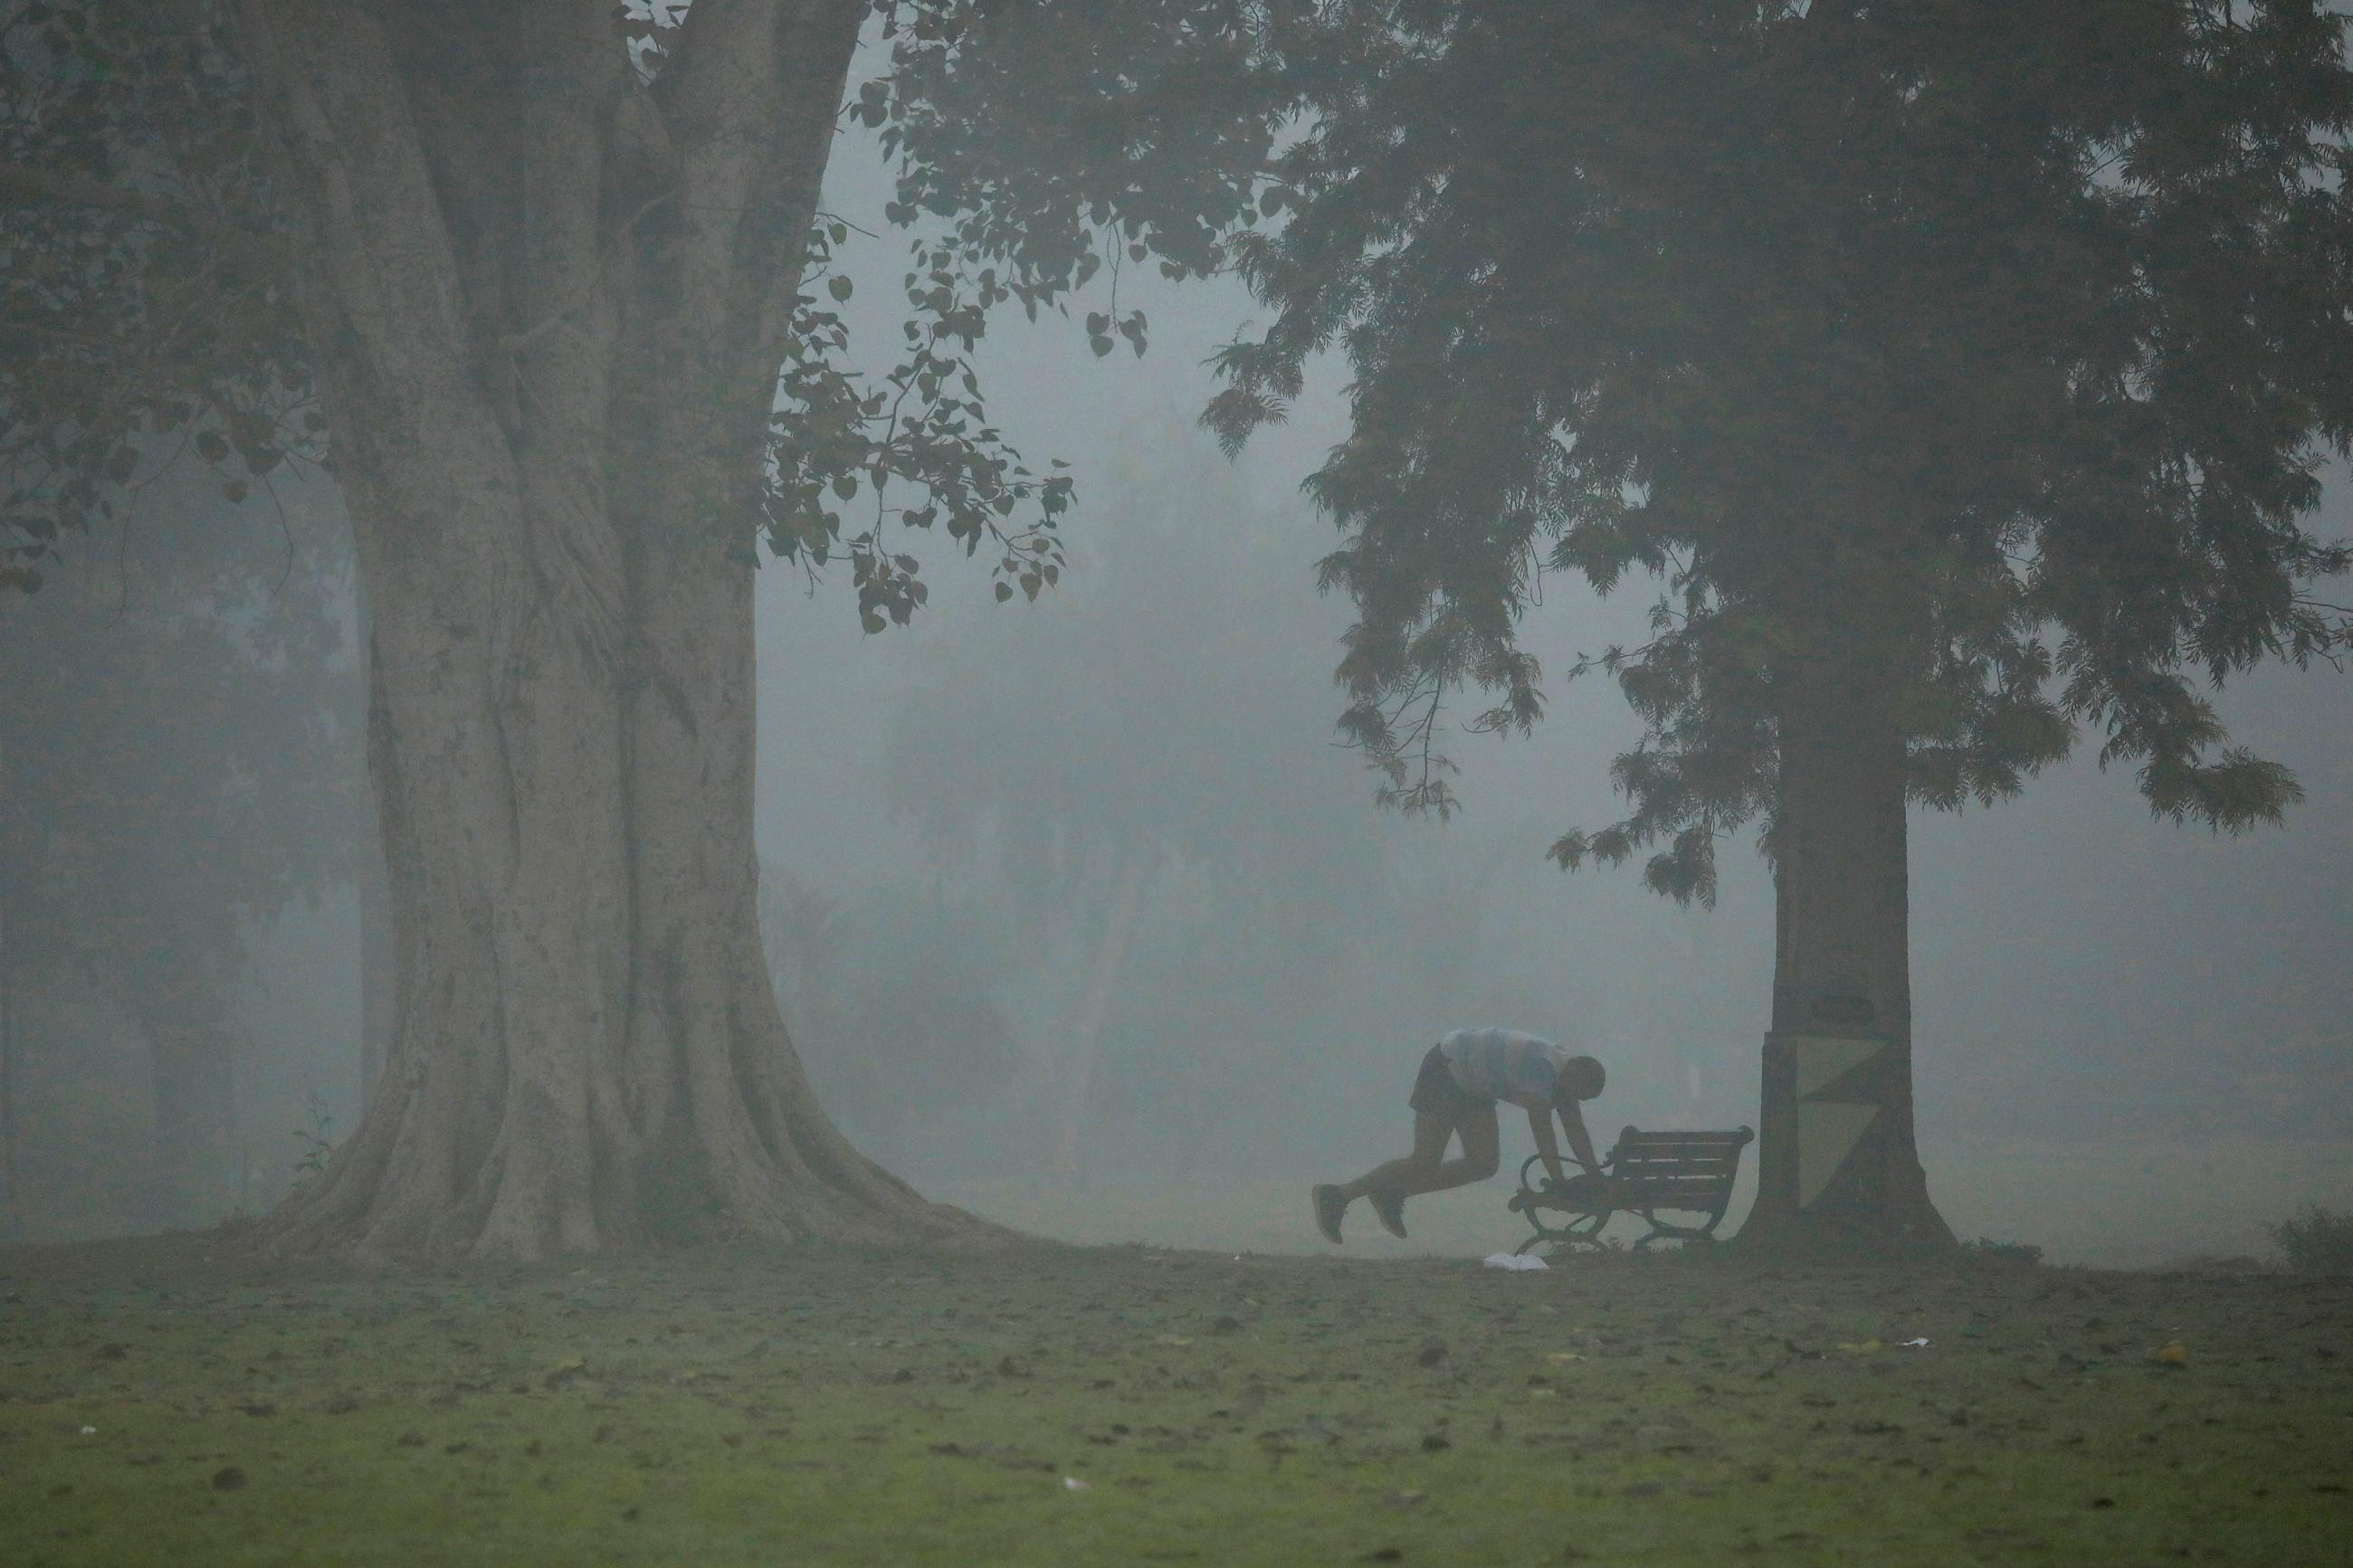 A man exercises in a park on a smoggy morning in New Delhi, India, on November 9, 2017.